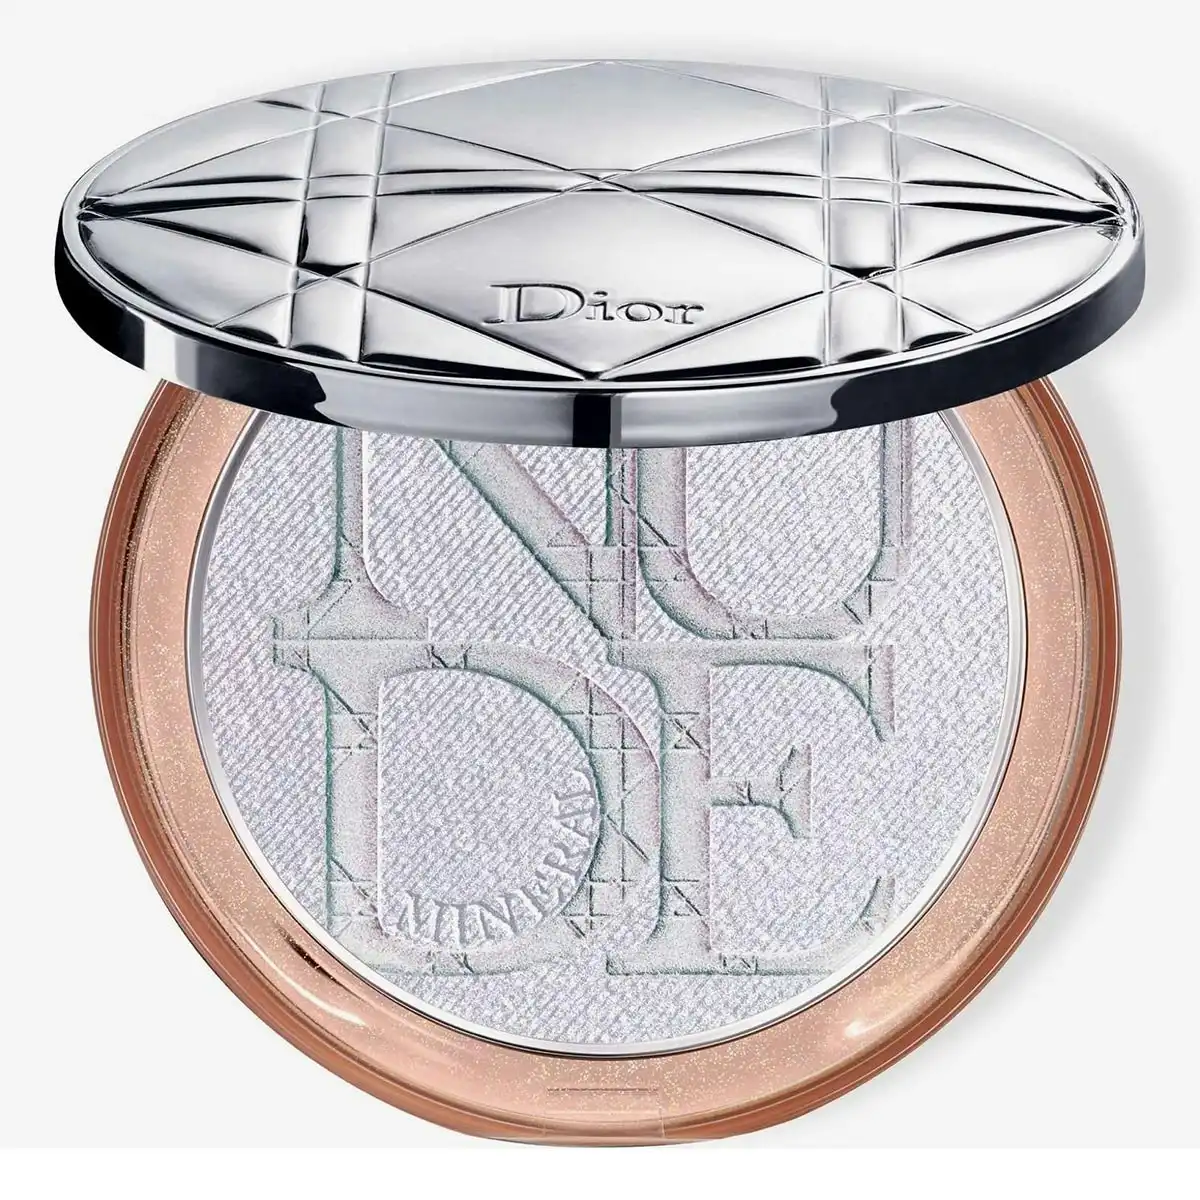 Christian Dior Mineral Nude Luminizer Shimmering Glow Powder 06 Holographic Glow 6g